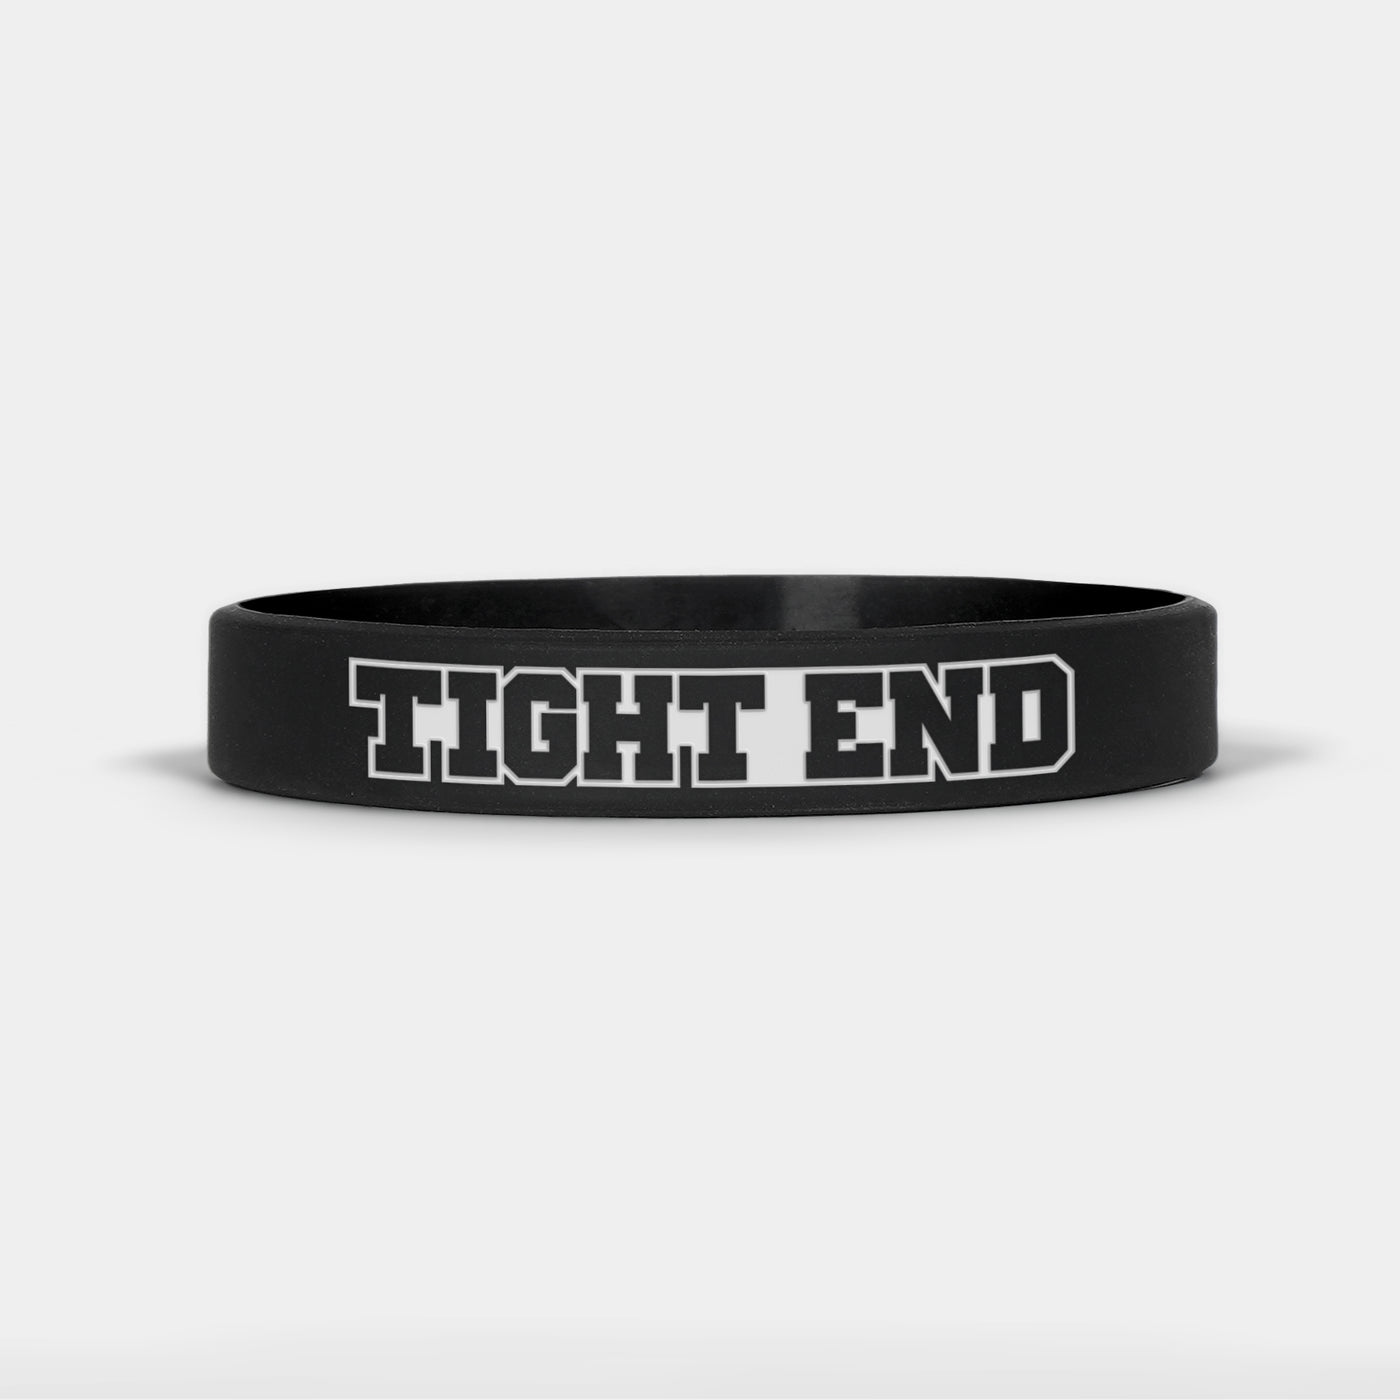 Tight End Motivational Wristband